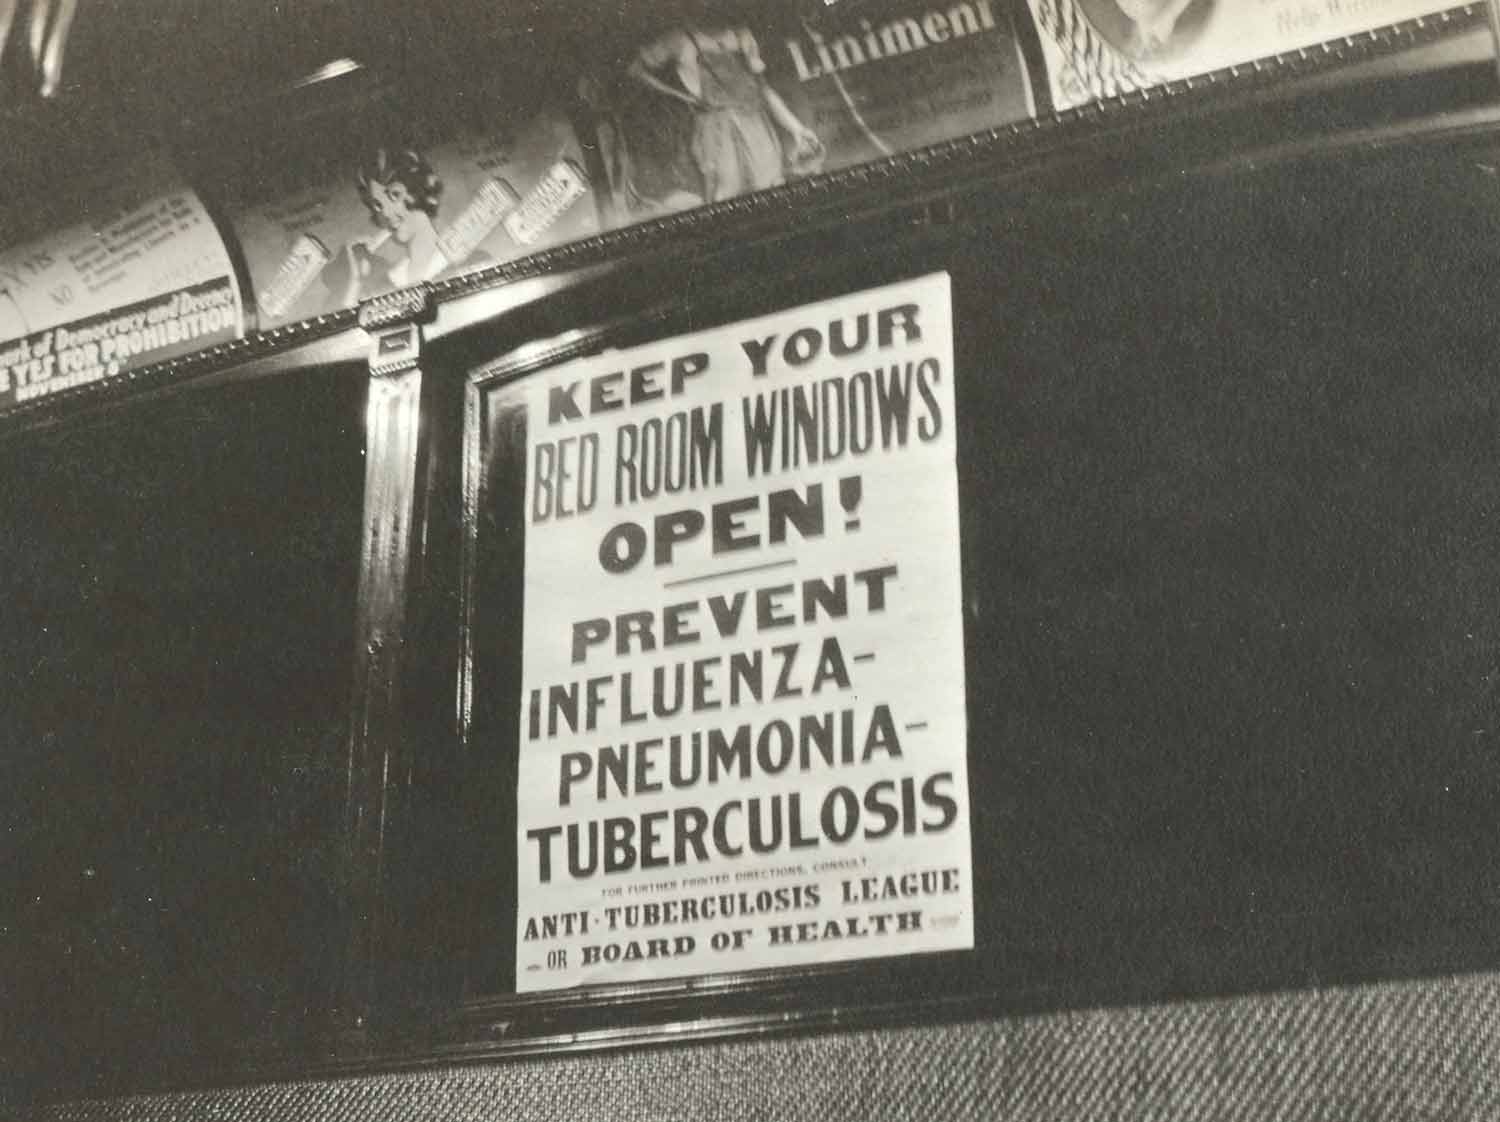 Sign from 1918 that reads Keep your bedroom windows open! Prevent influenza-pneumonia-tu